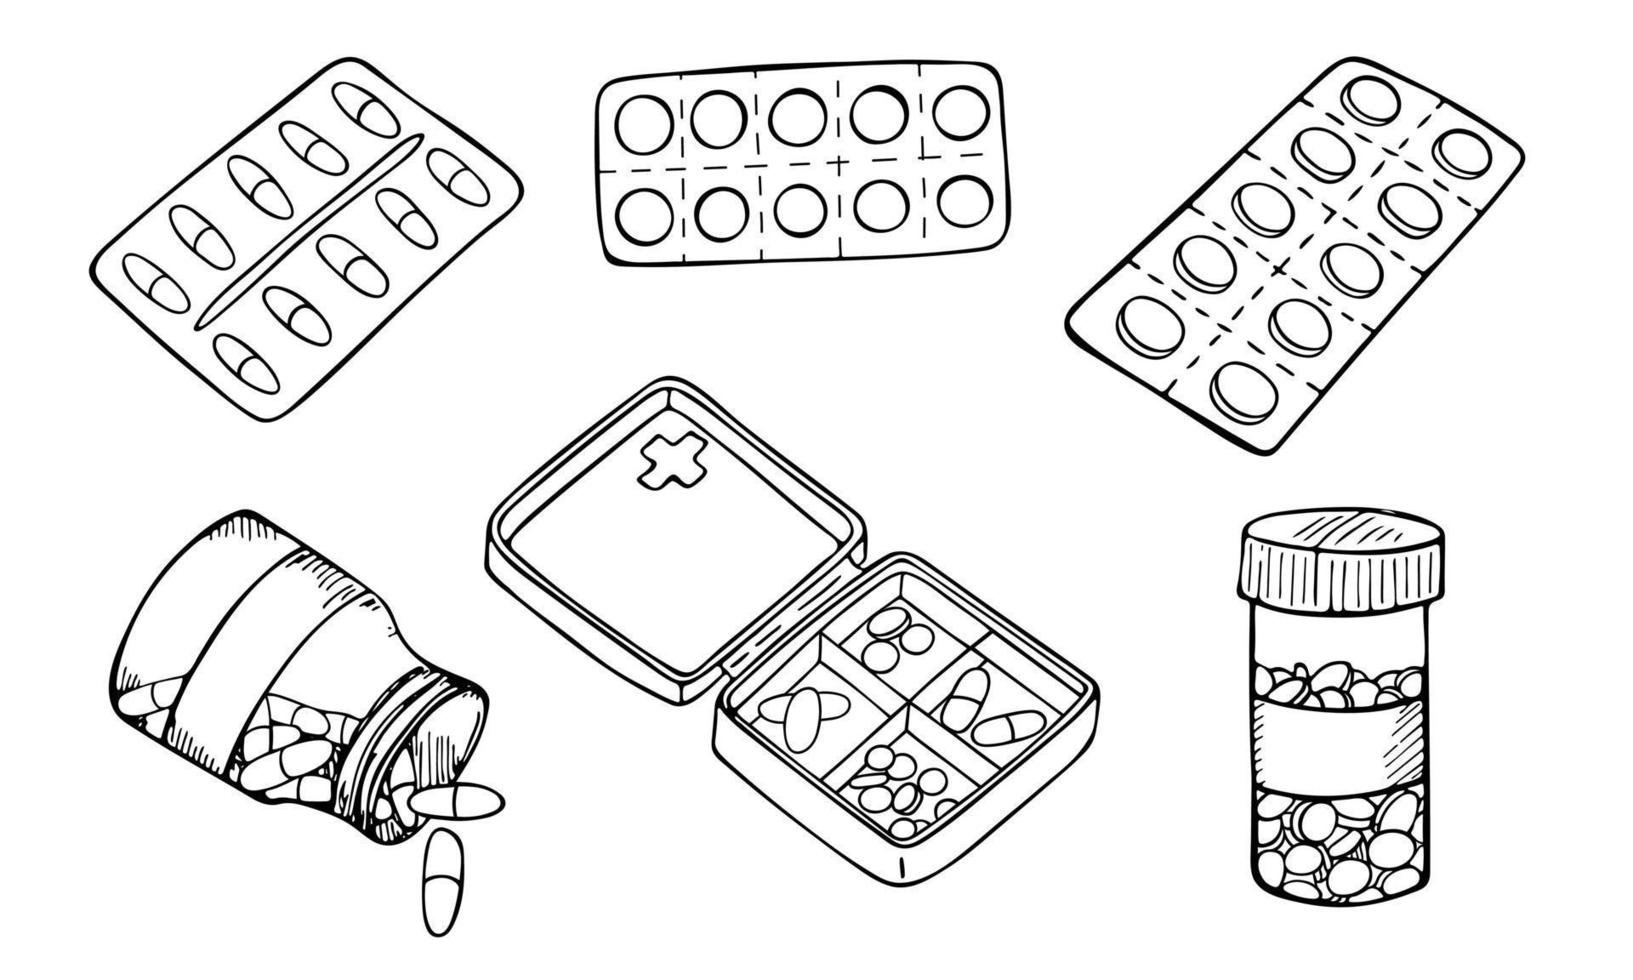 Vector sketch set of pills blister package isolated on white background. Hand drawn pills icon. Doodle medical illustration. For print, web, design, decor, logo.